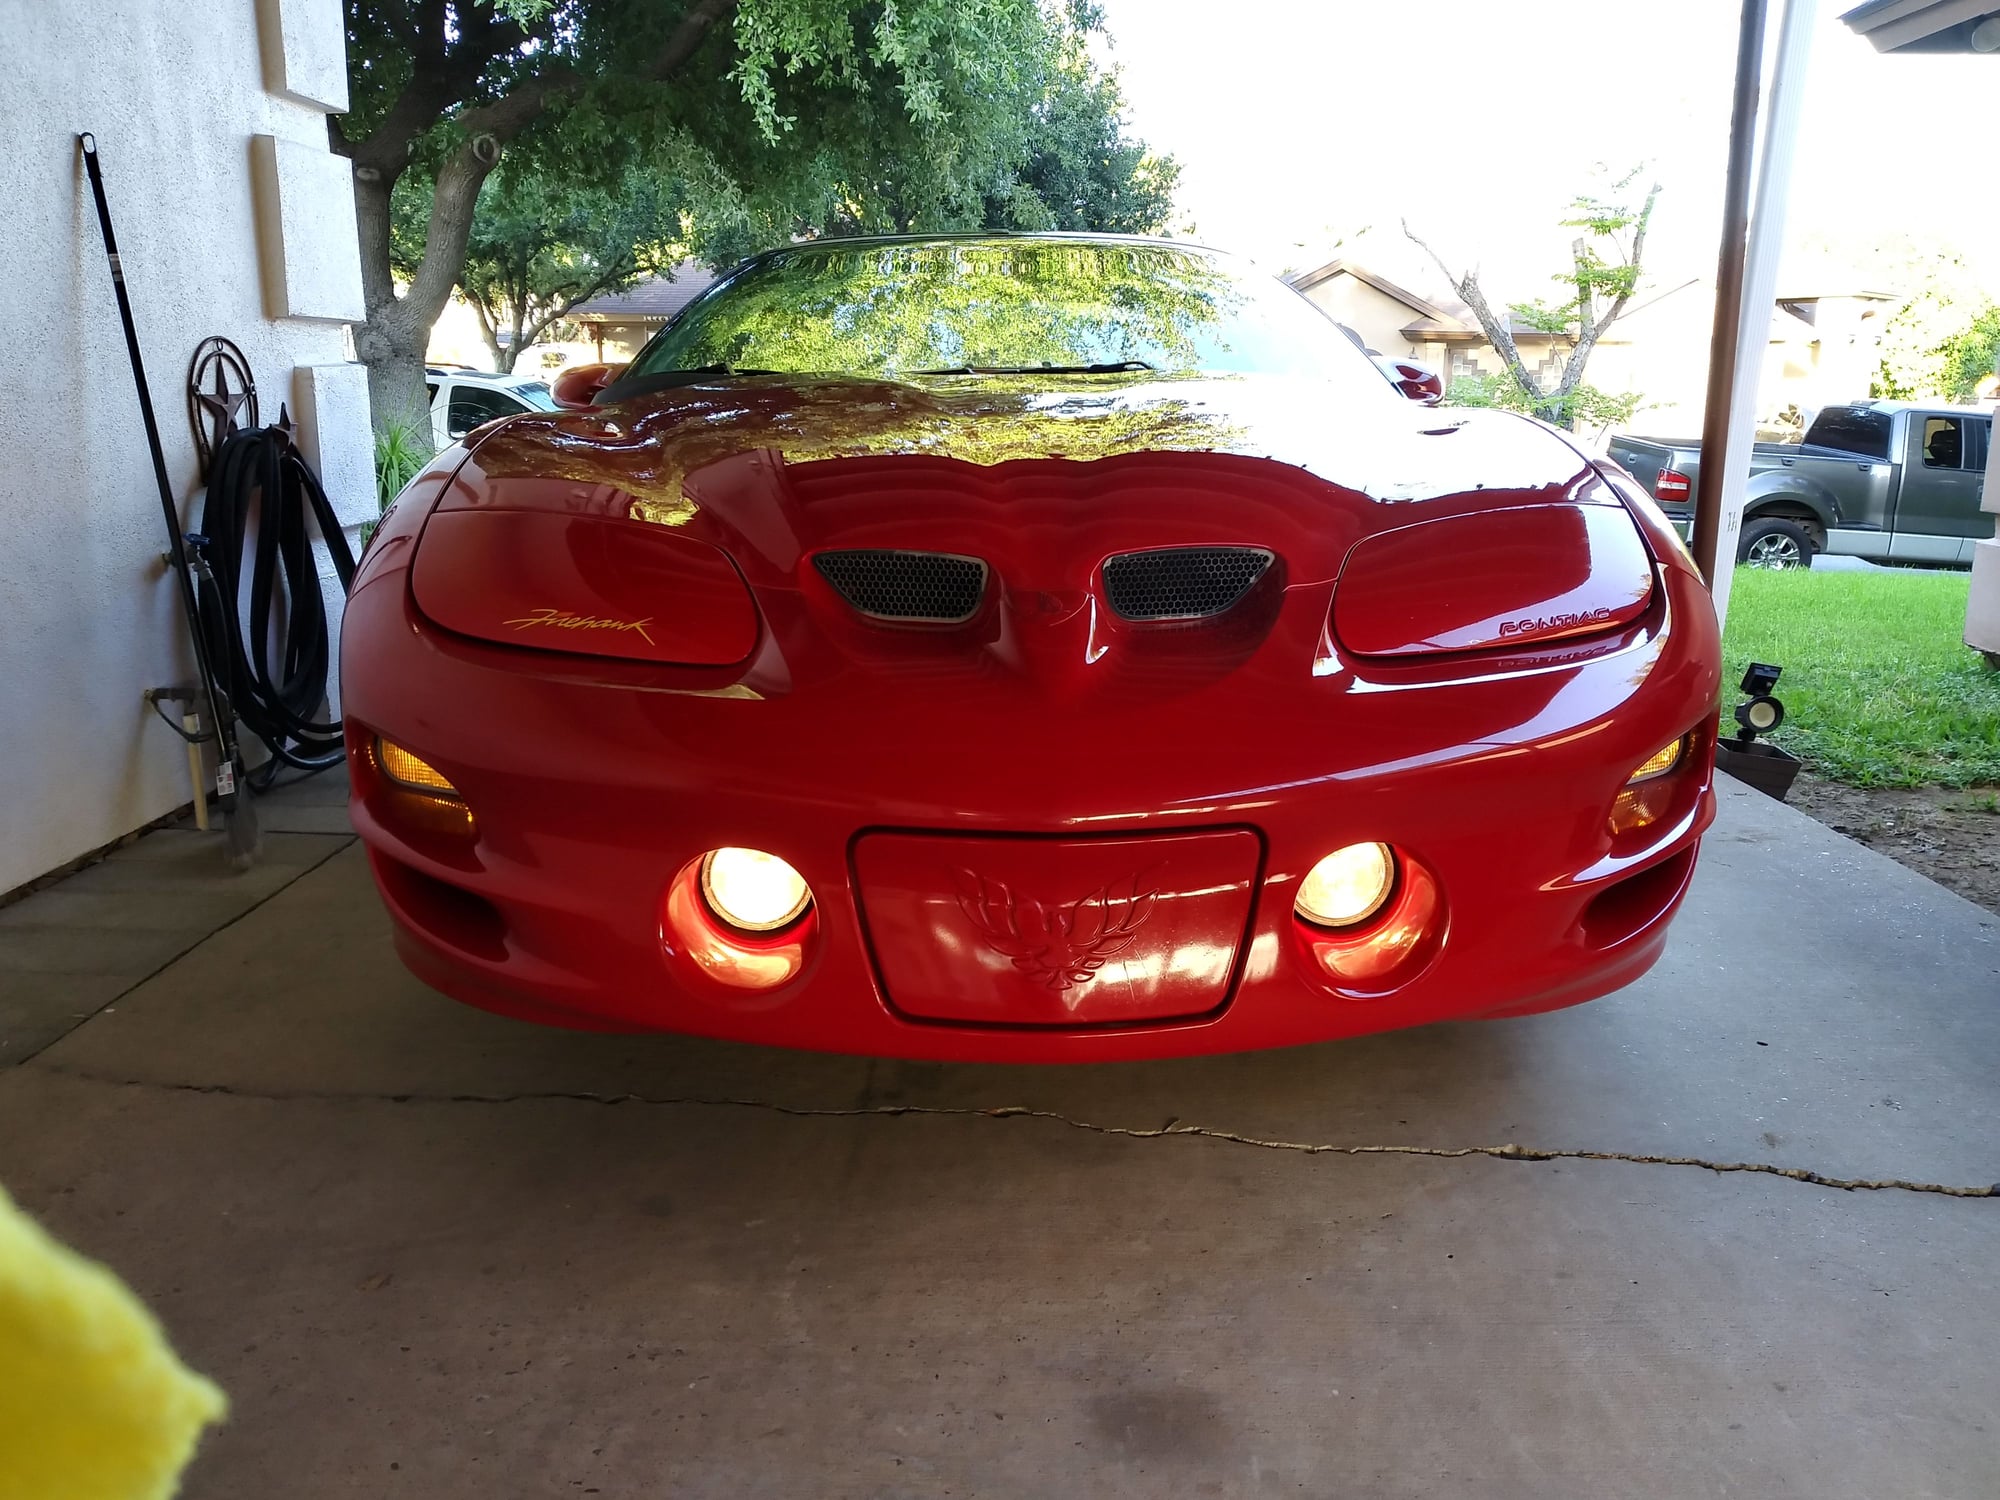 2000 Pontiac Firebird - 2000 Trans Am Firehawk - Used - VIN 2G2ABCDE123456 - 49,071 Miles - 8 cyl - 2WD - Automatic - Coupe - Red - Laredo, TX 78045, United States